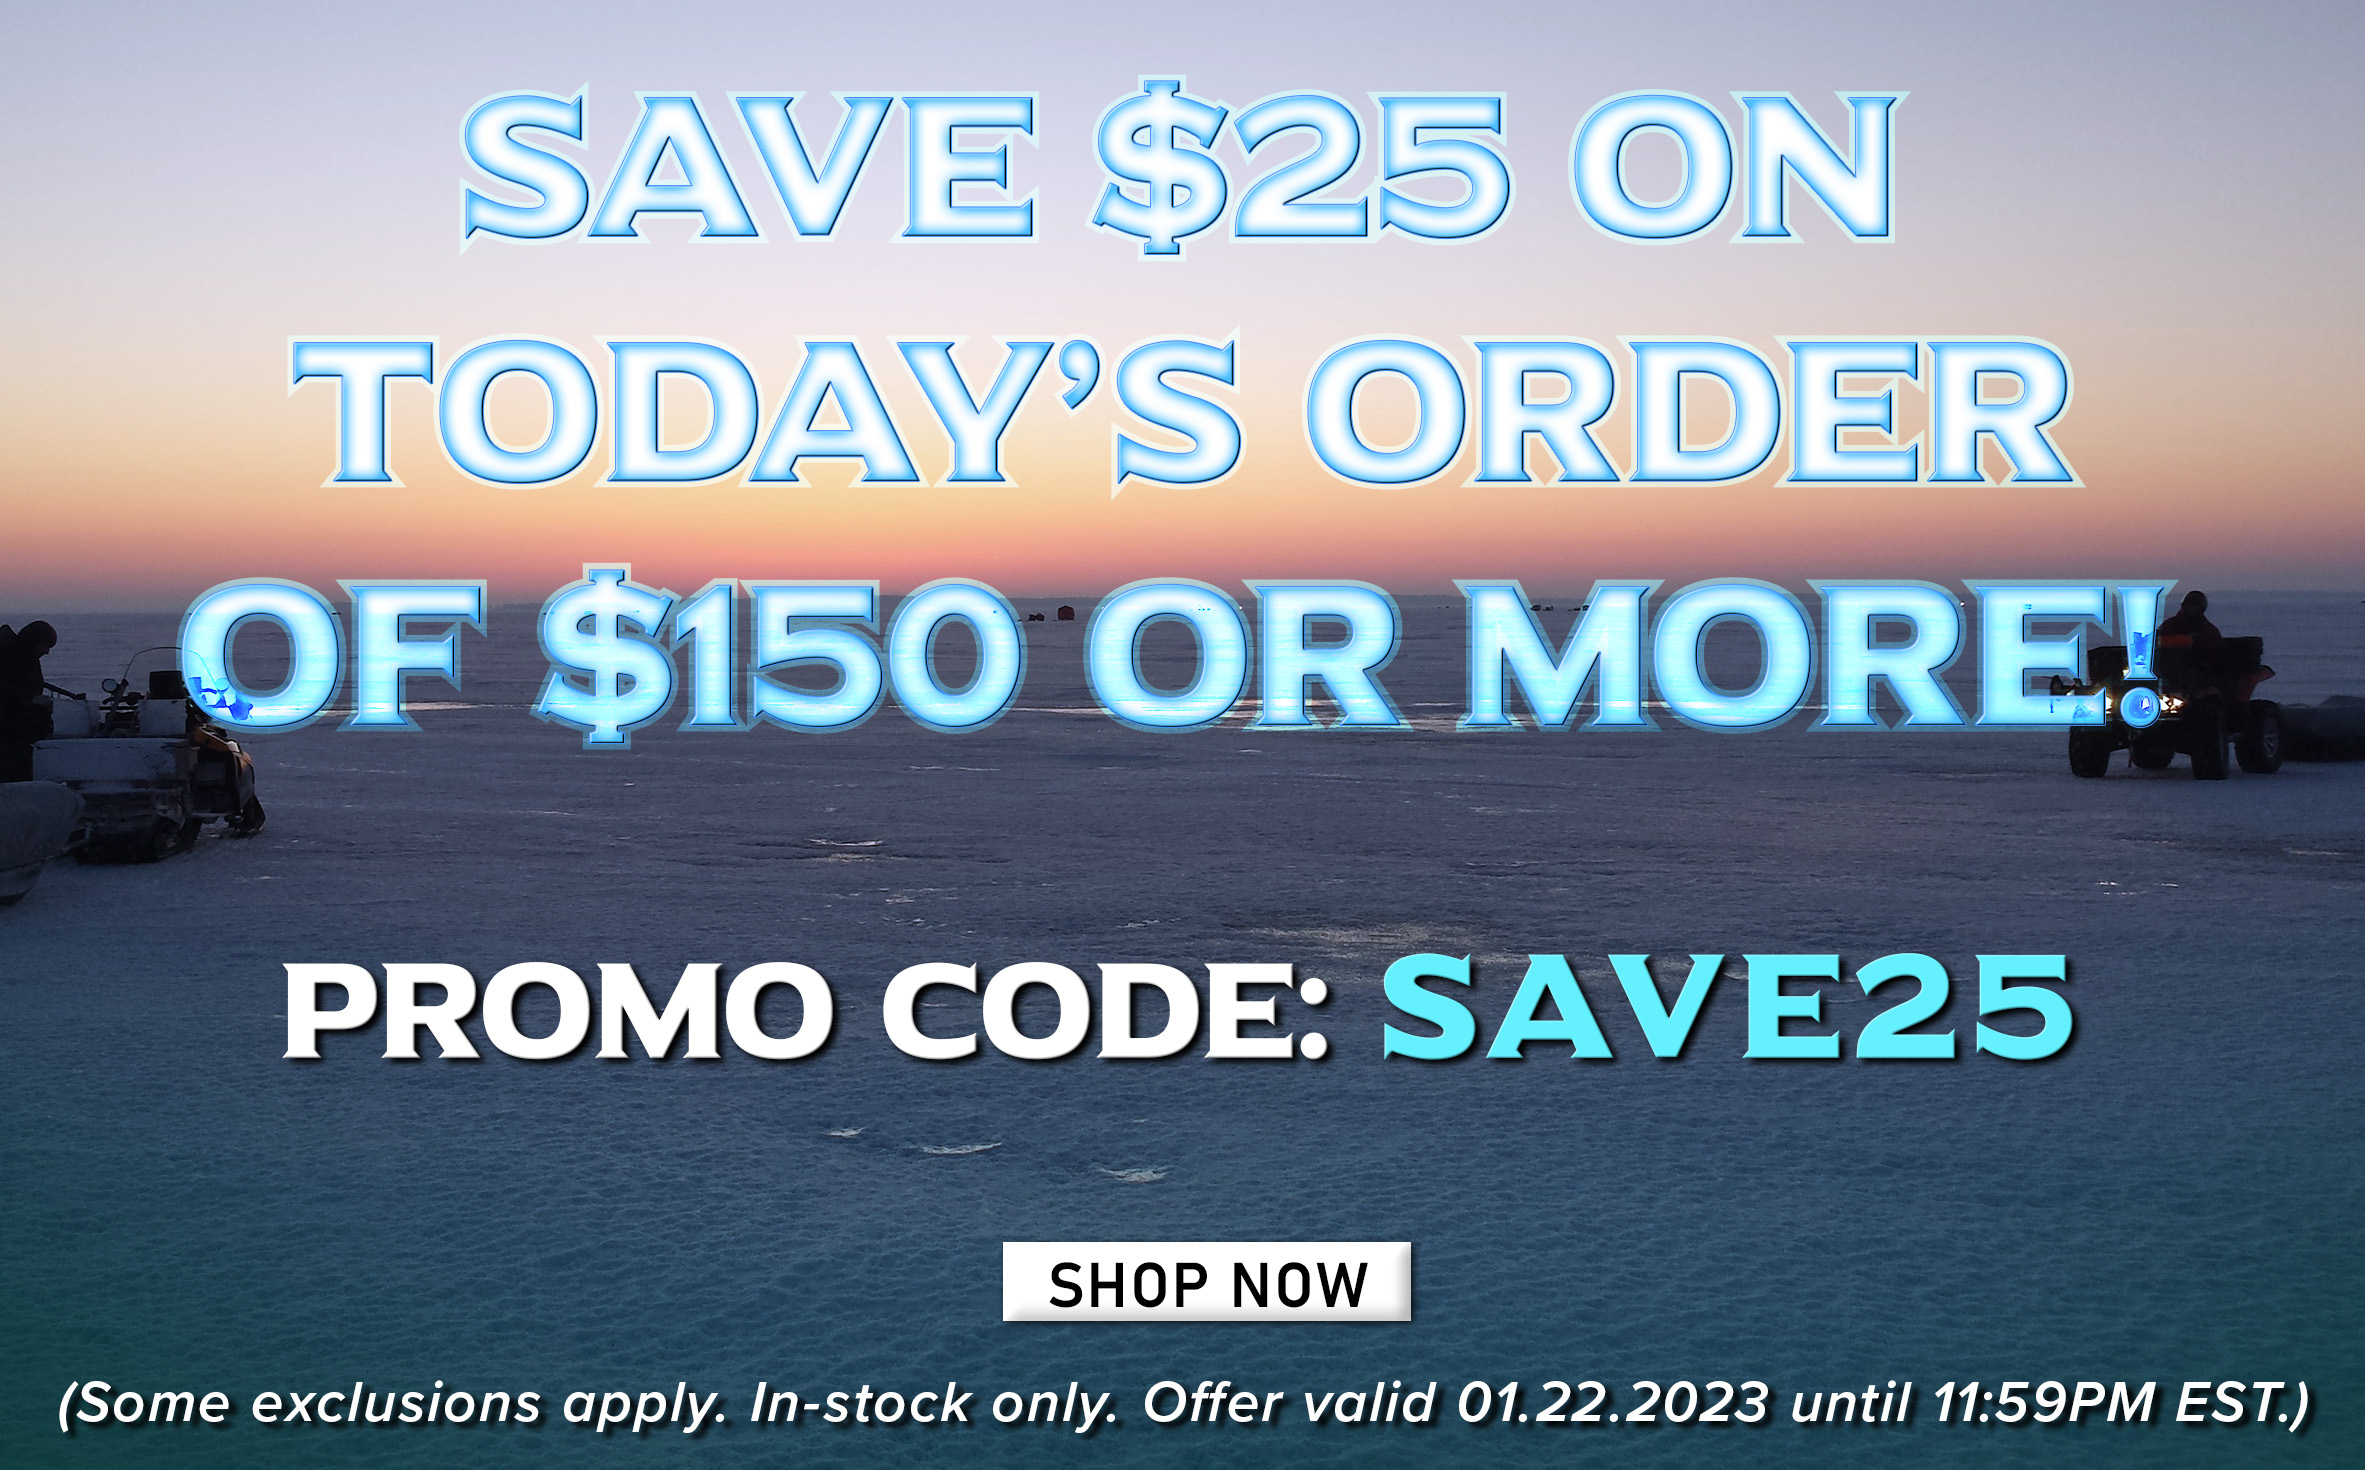 Save $25 On All Orders Over $150 Ends Soon! - Fish USA